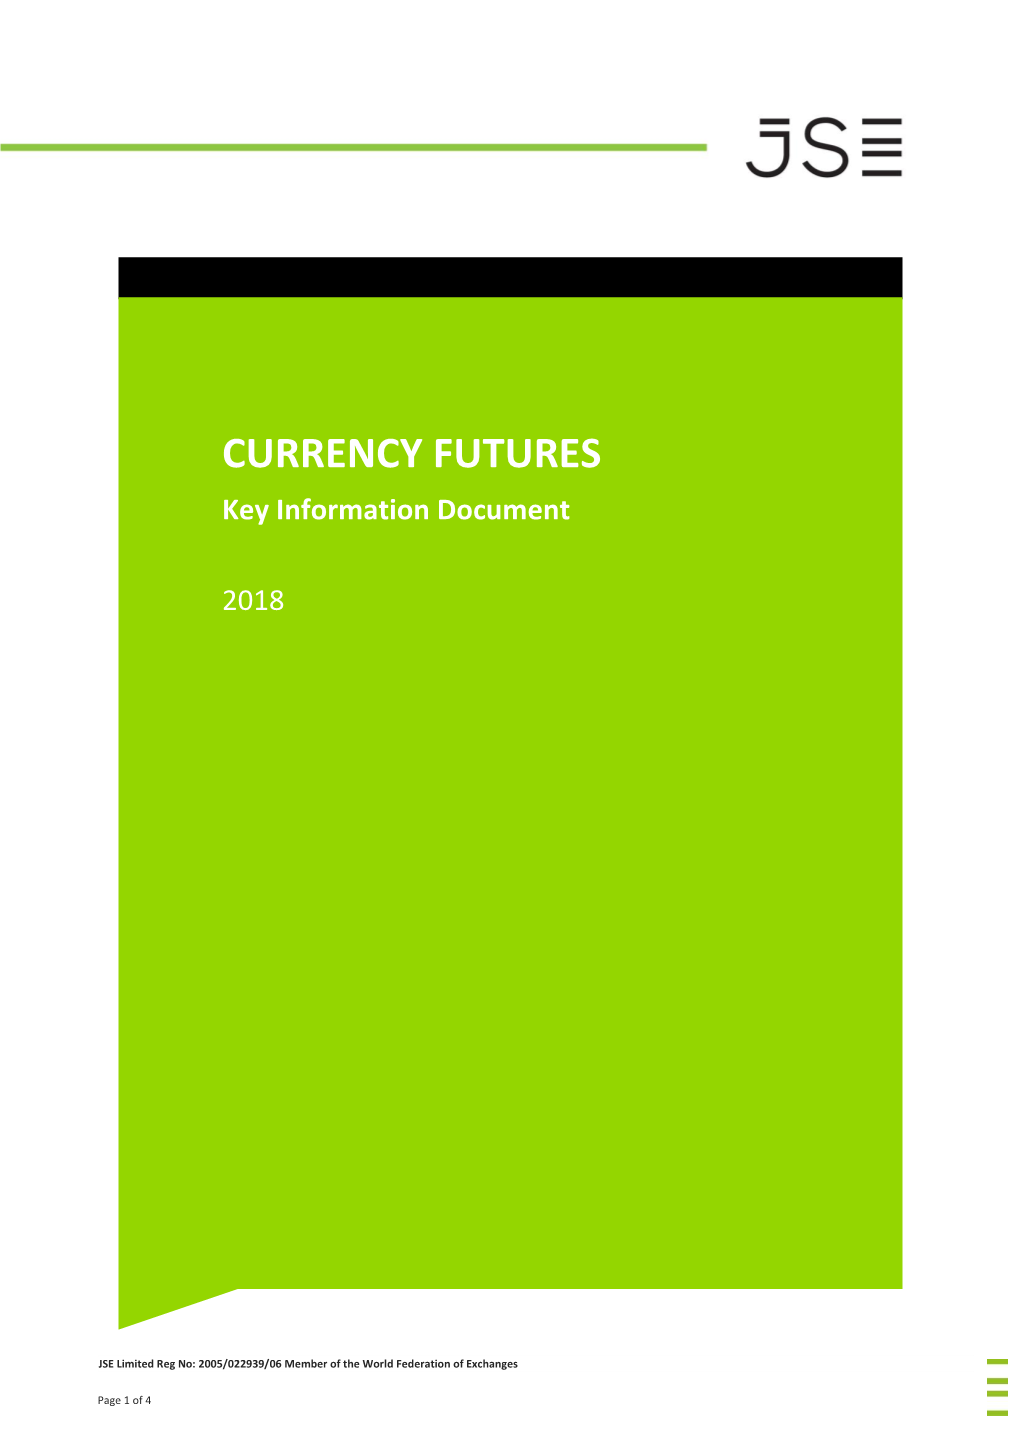 CURRENCY FUTURES Key Information Document